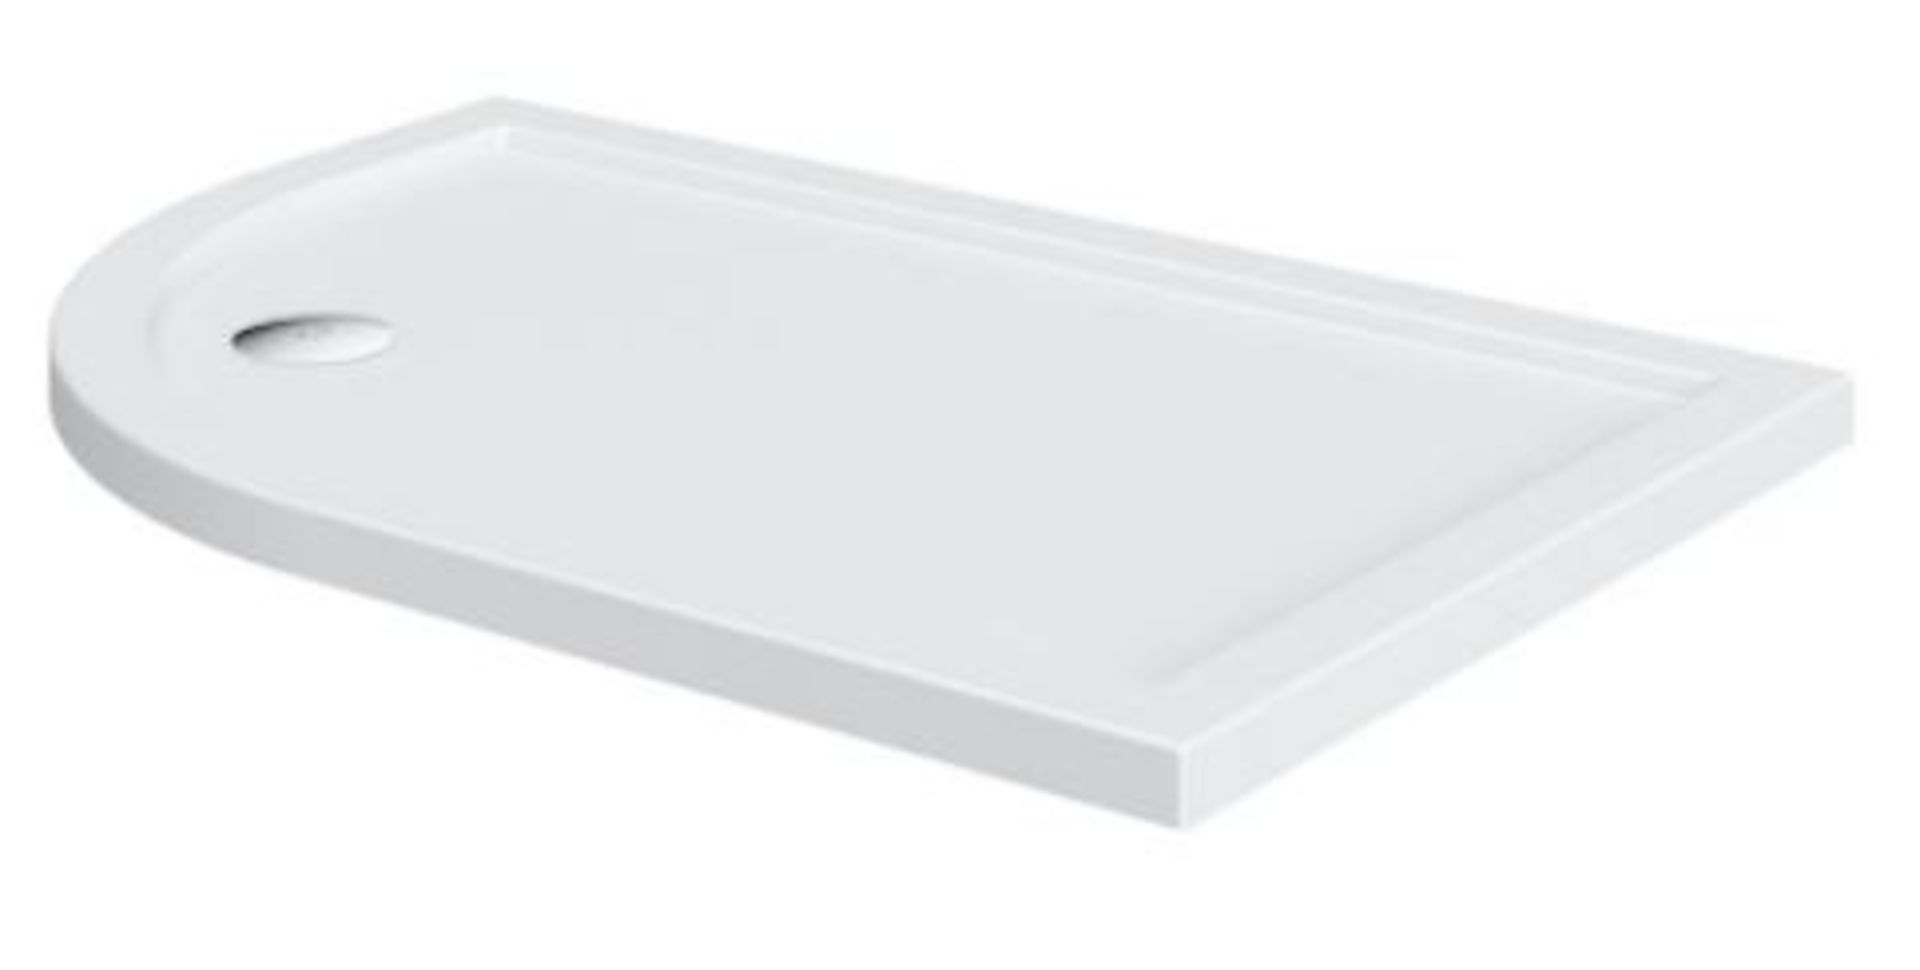 RRP £225. Orchard left handed offset quadrant stone shower tray 900 x 760. Appears new, Unopened Wi